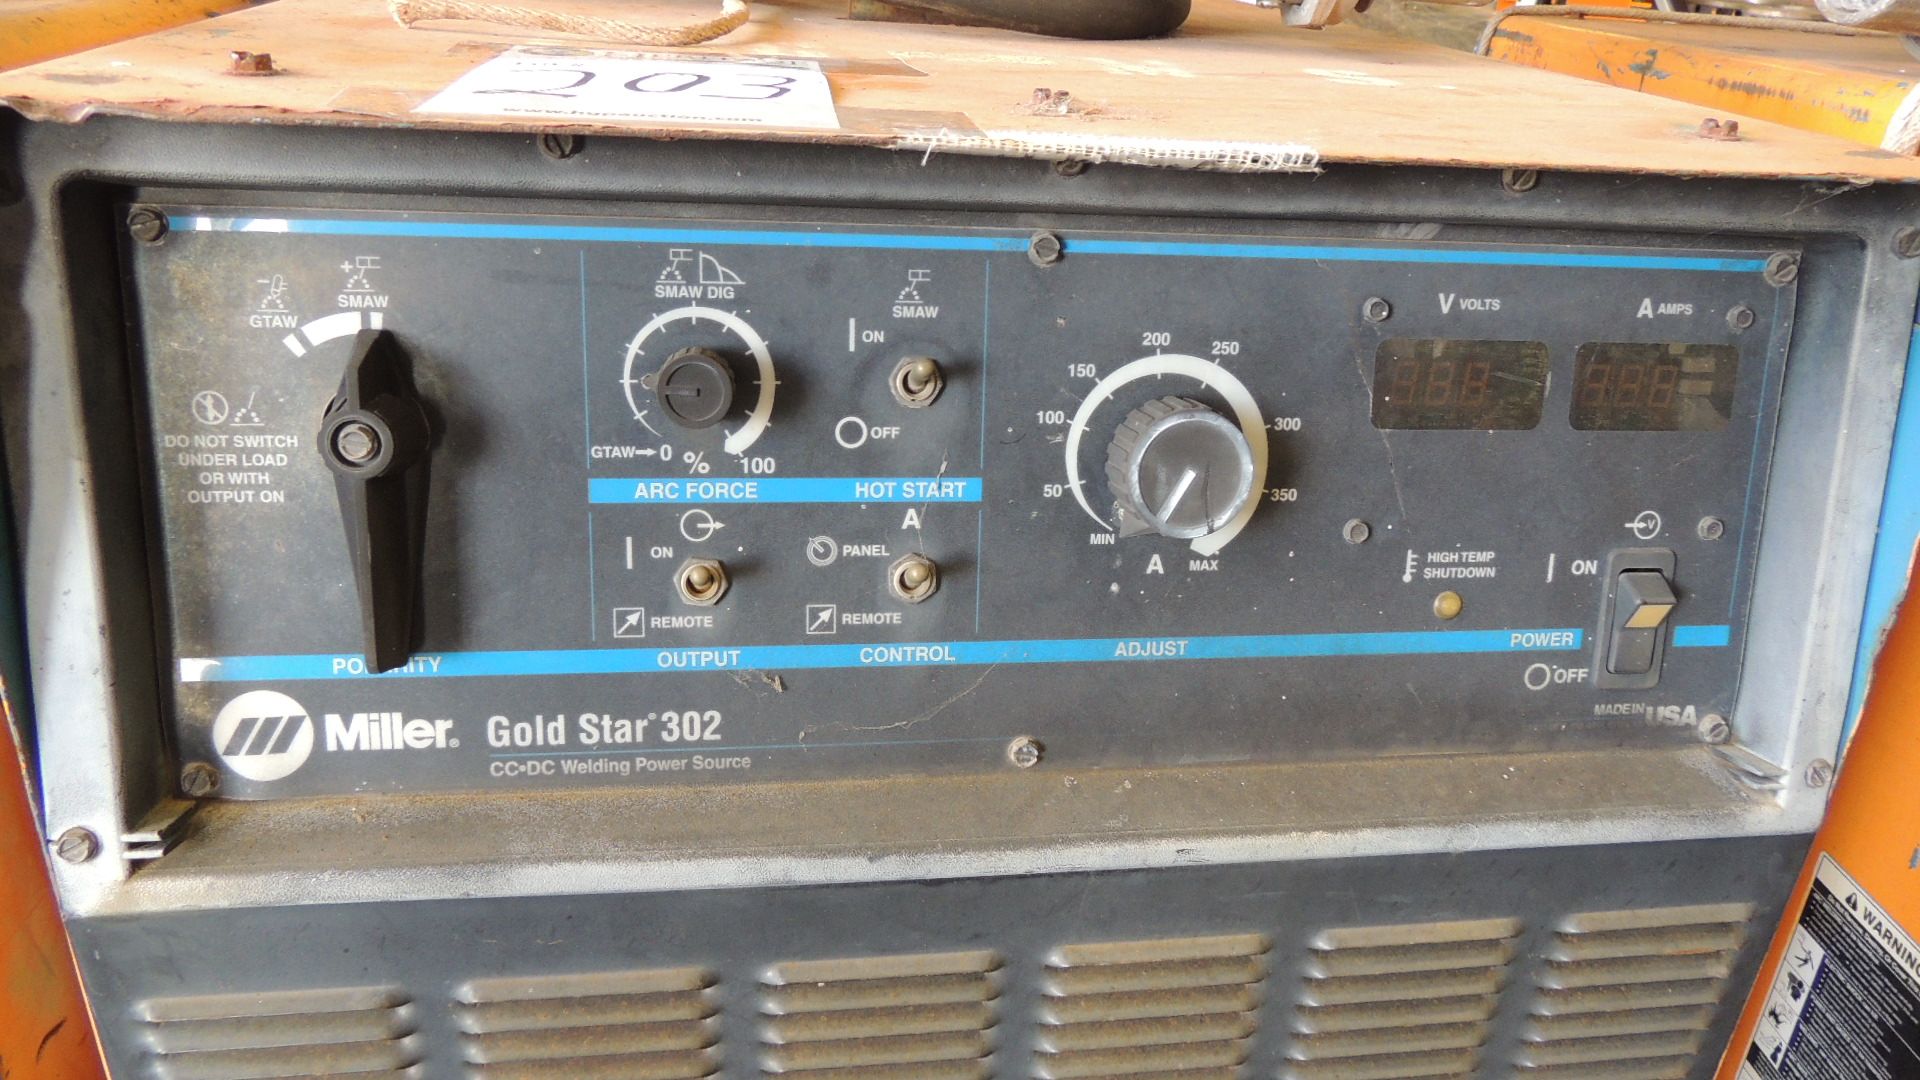 Welder. Miller Gold Star 302 CC.DC welding power source, on casters, volts and amps digital readout, - Image 2 of 4